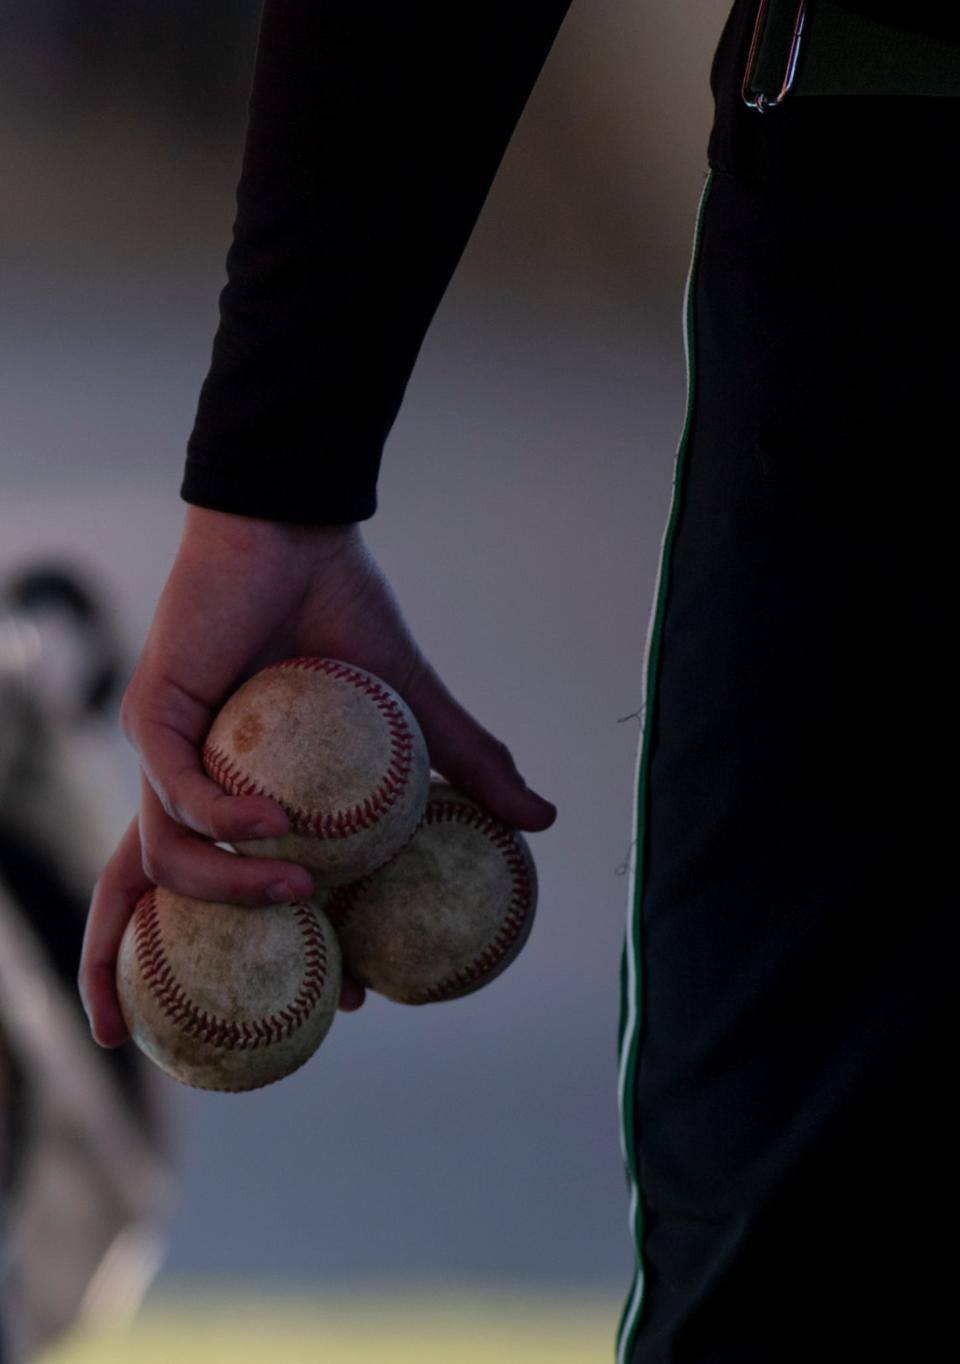 A North High School baseball player collects baseballs after warmups before the game against the Mount Vernon Wildcats at Mount Vernon High School in Mount Vernon, Ind., Friday night, April 1, 2022. One dozen game-quality baseballs now cost about $87. Teams and coaches are making sure to get the most out of each ball. 